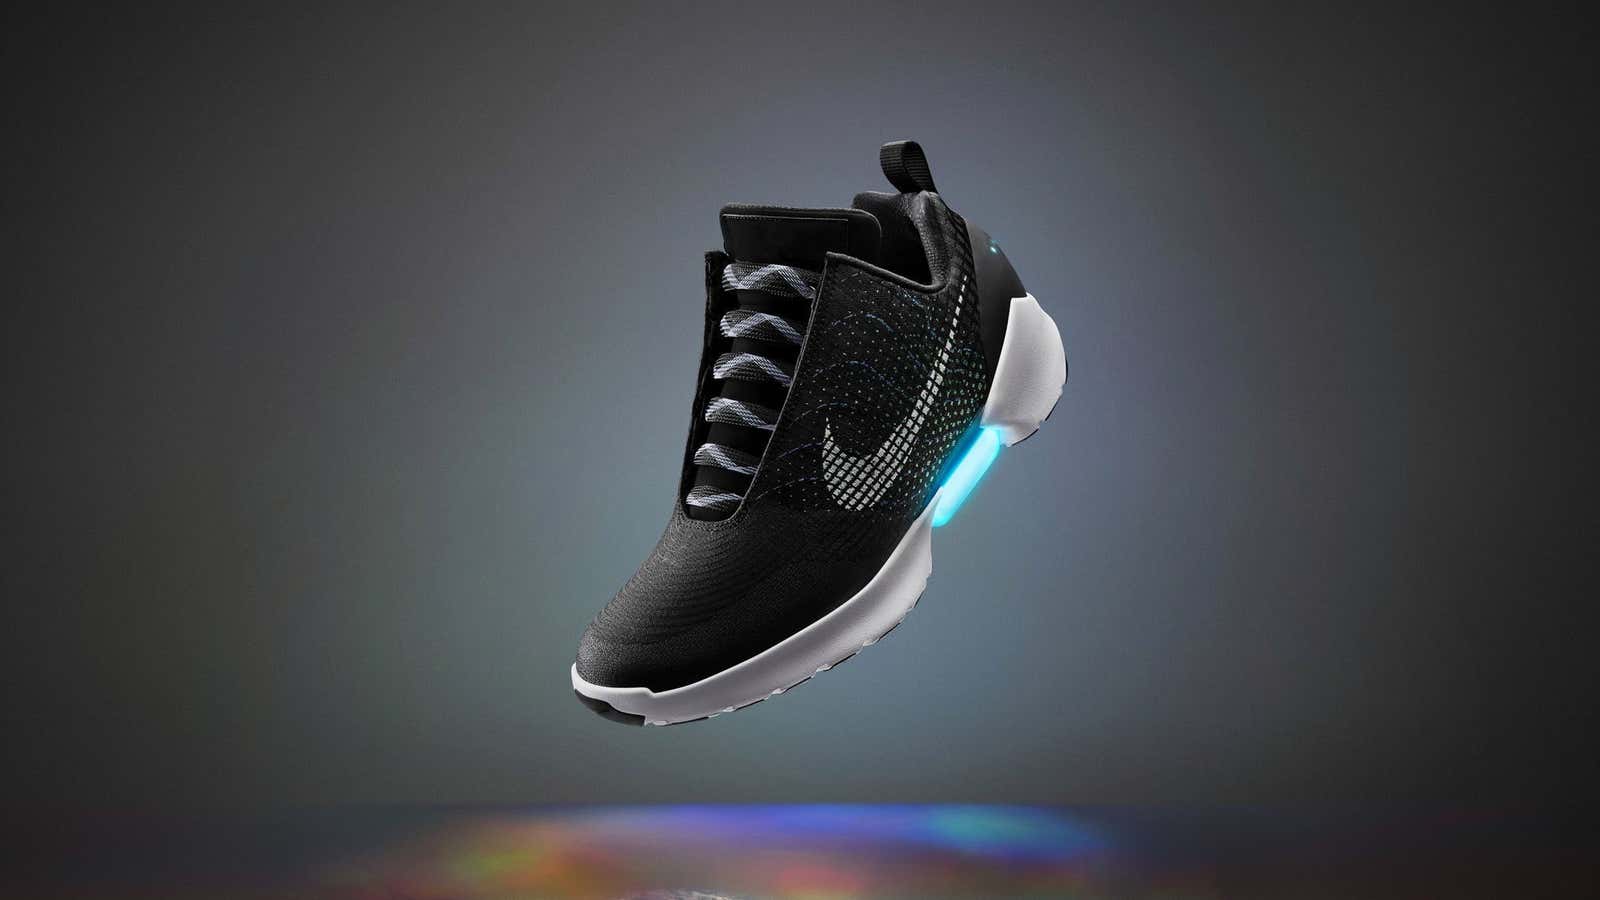 Teleurstelling Klein Email schrijven How Nike's HyperAdapt and Mag self-lacing sneakers were created